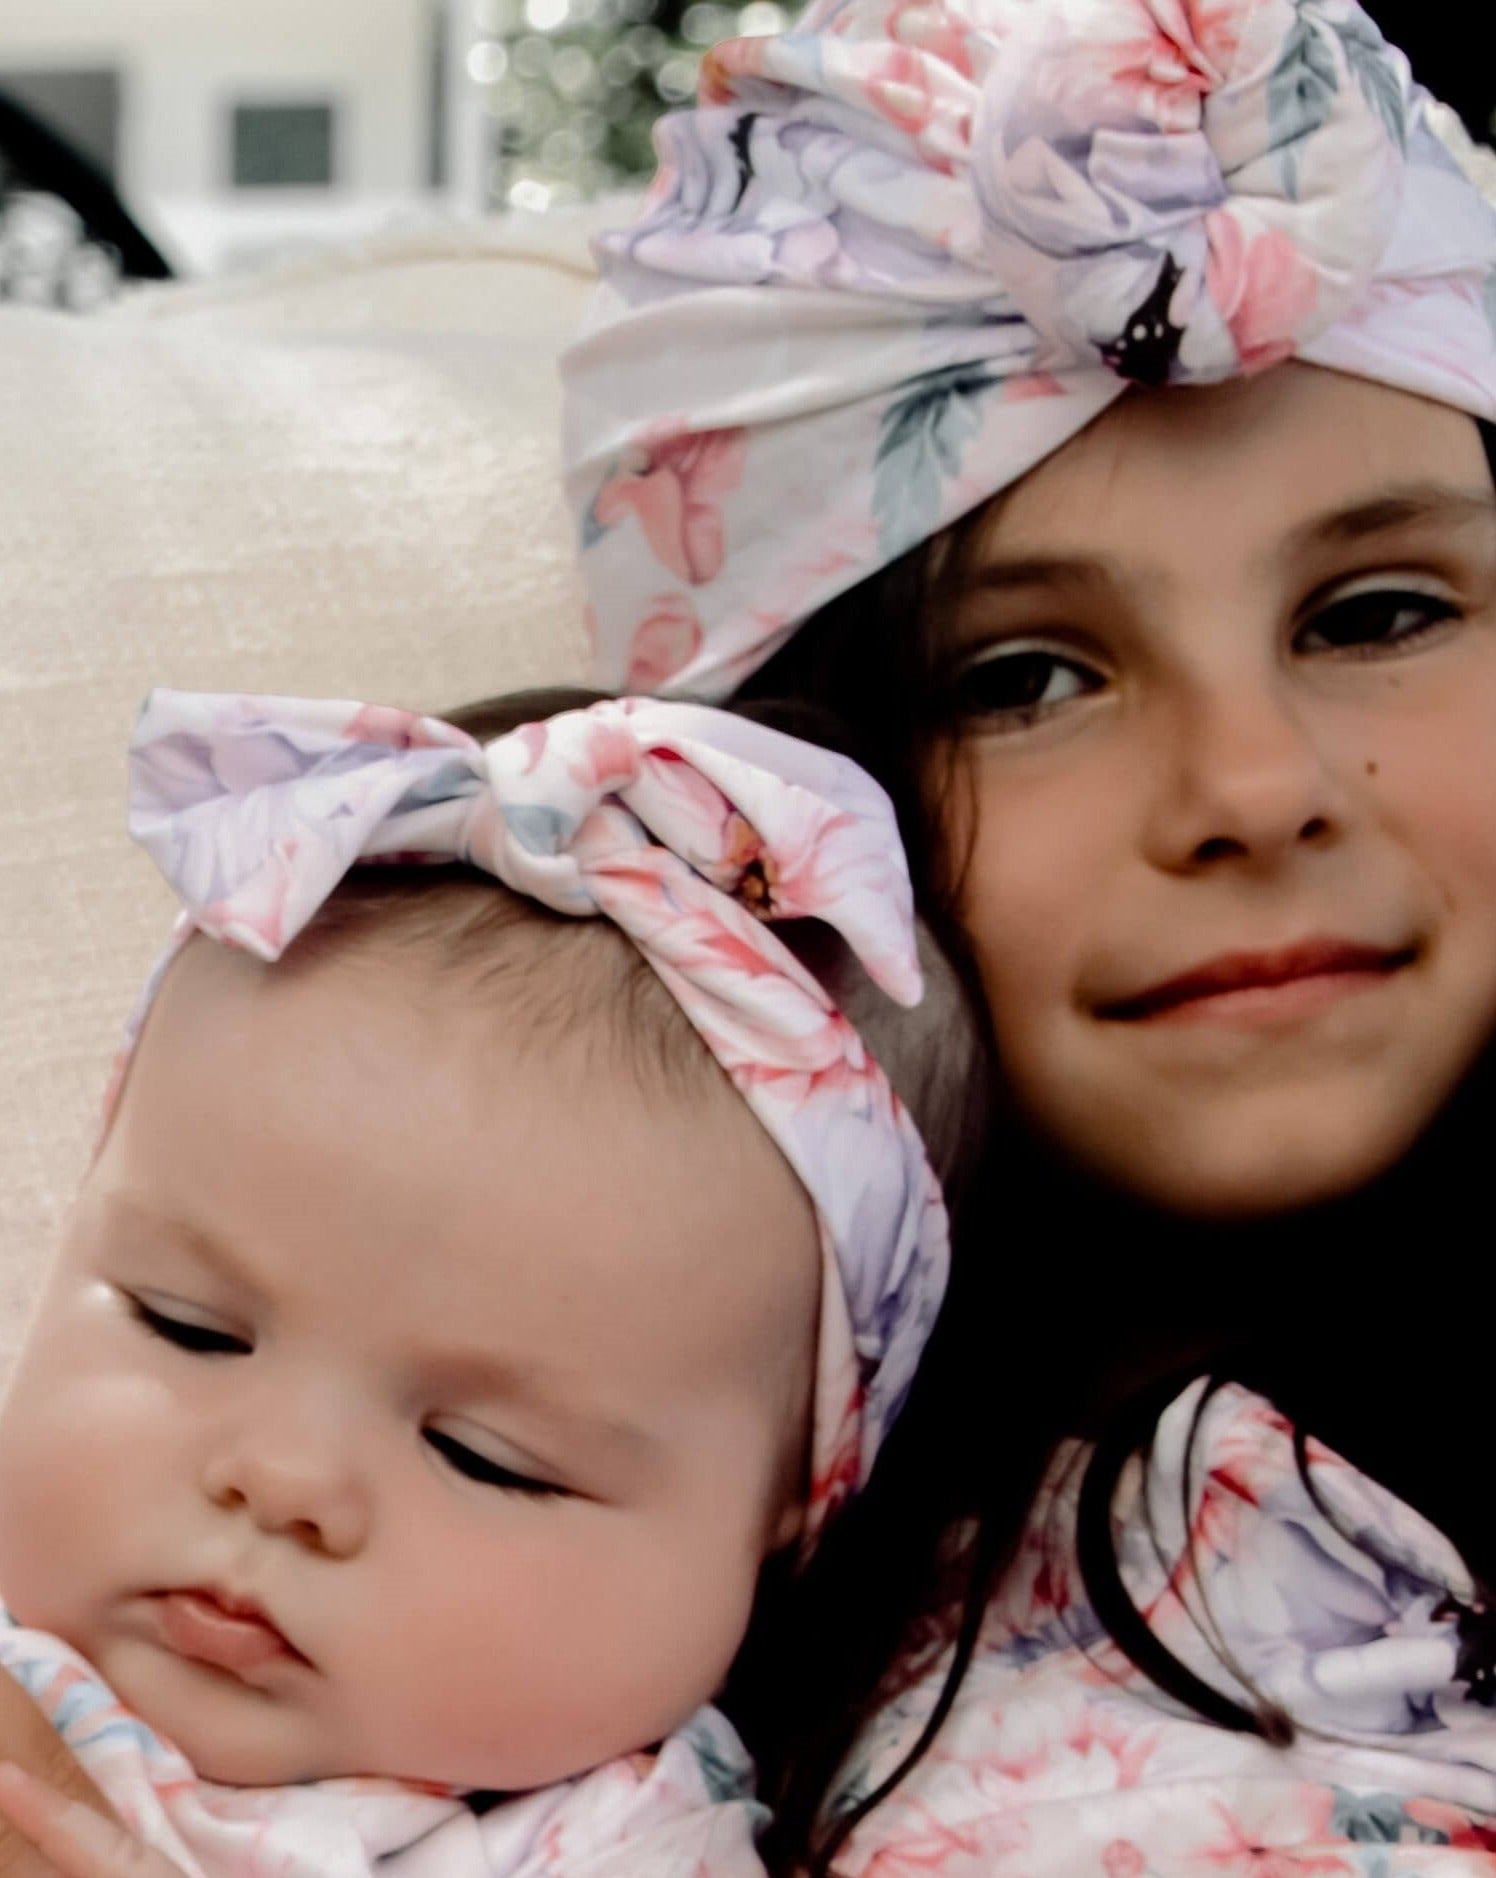 Baby and younf girl wearing matching swimsuits and a swim turban and headband in floral print